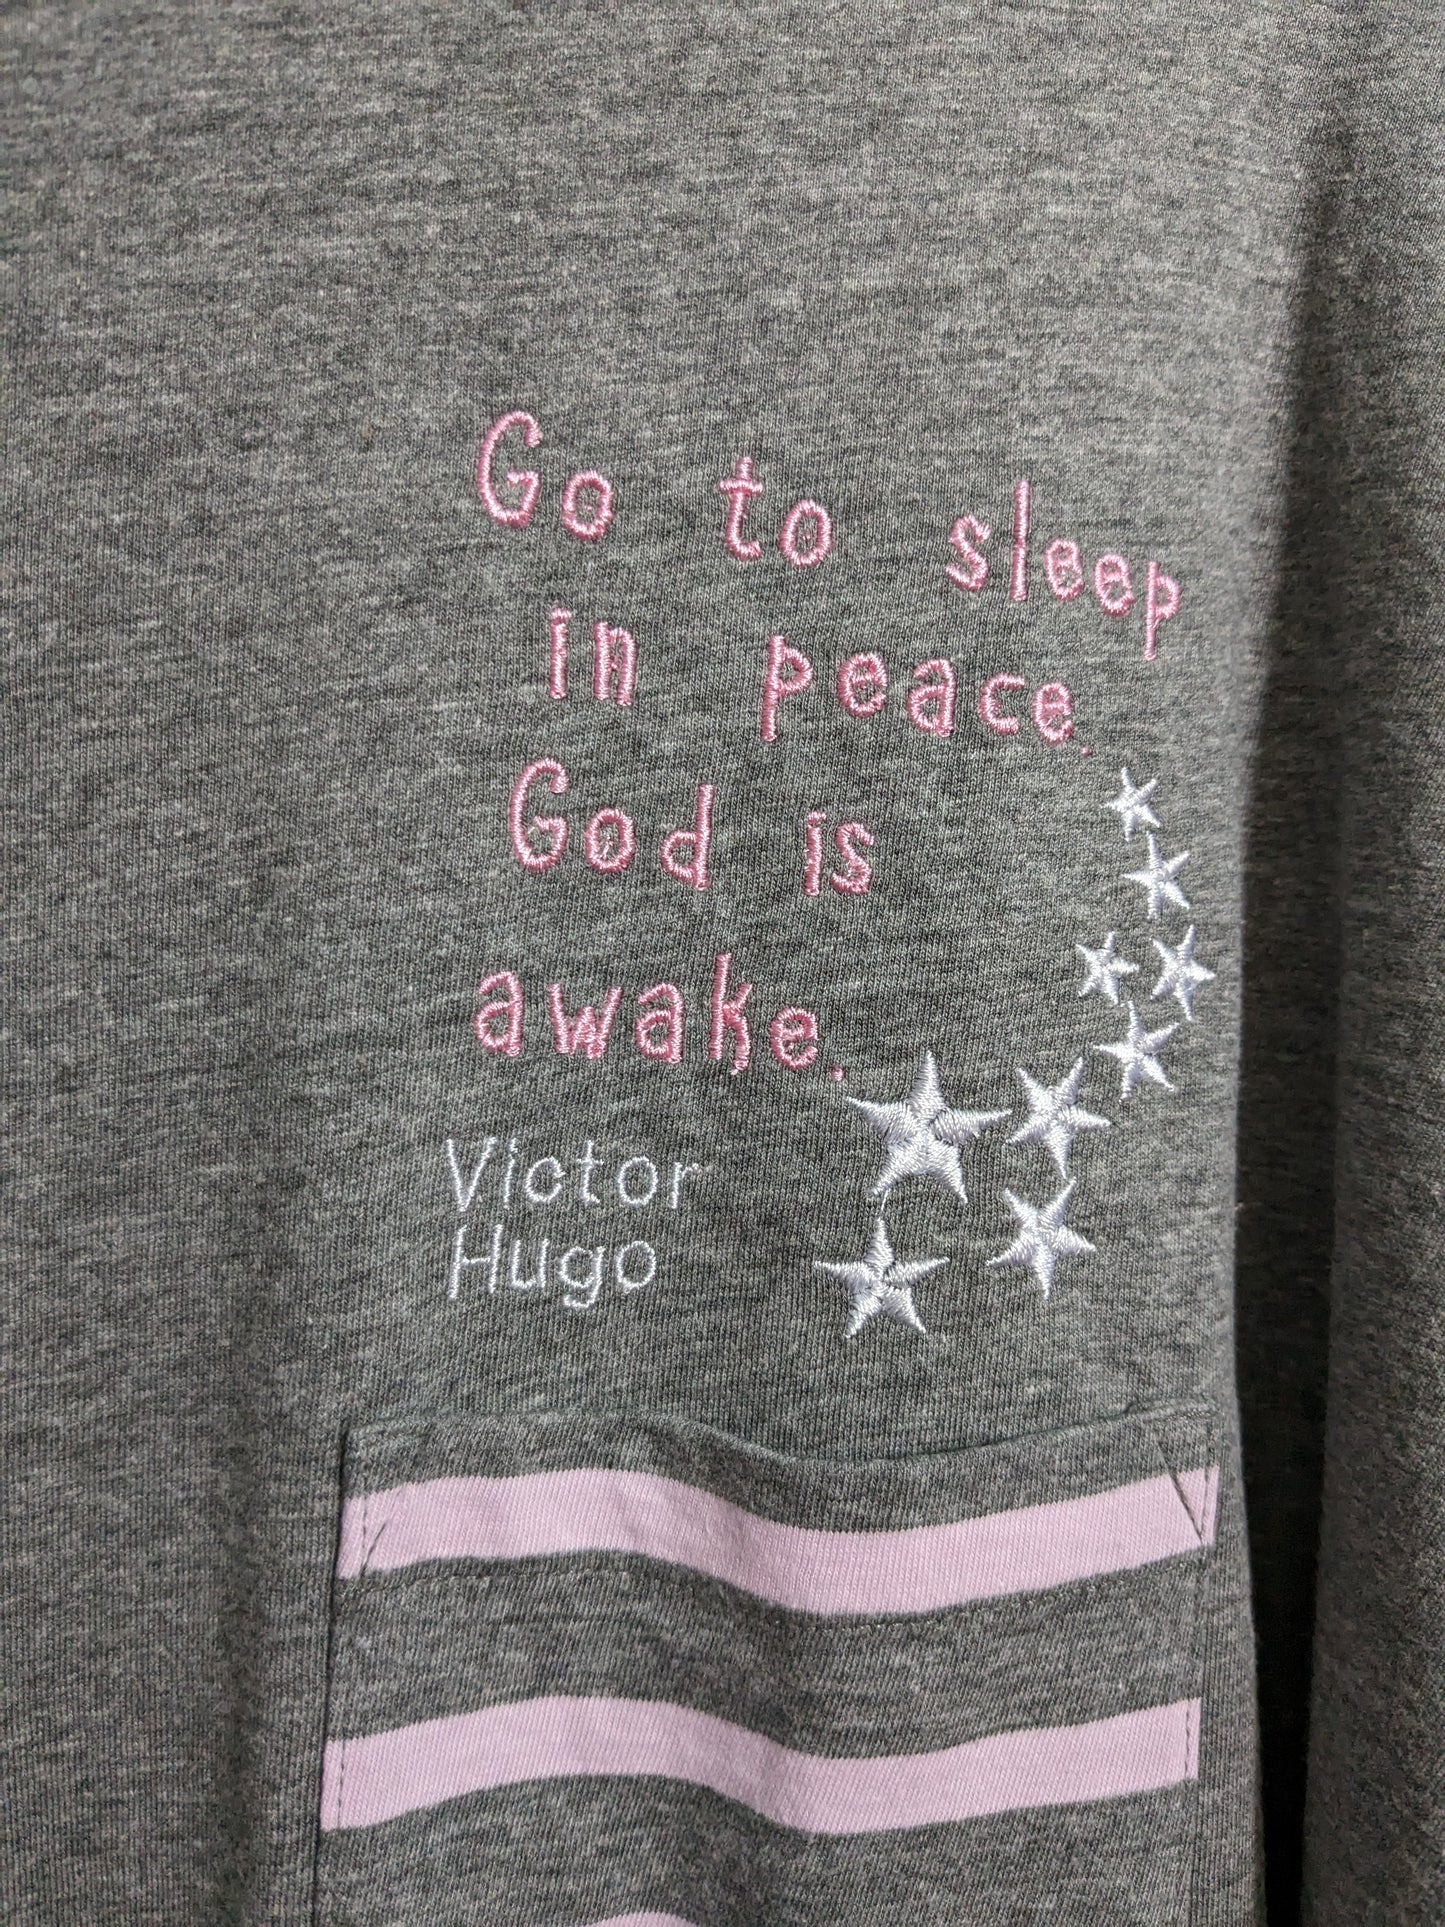 Size 20/22 Grey Star Reclaimed Embroidered Pyjama Two Piece Set - Victor Hugo Les Misérables Thoughtful Design